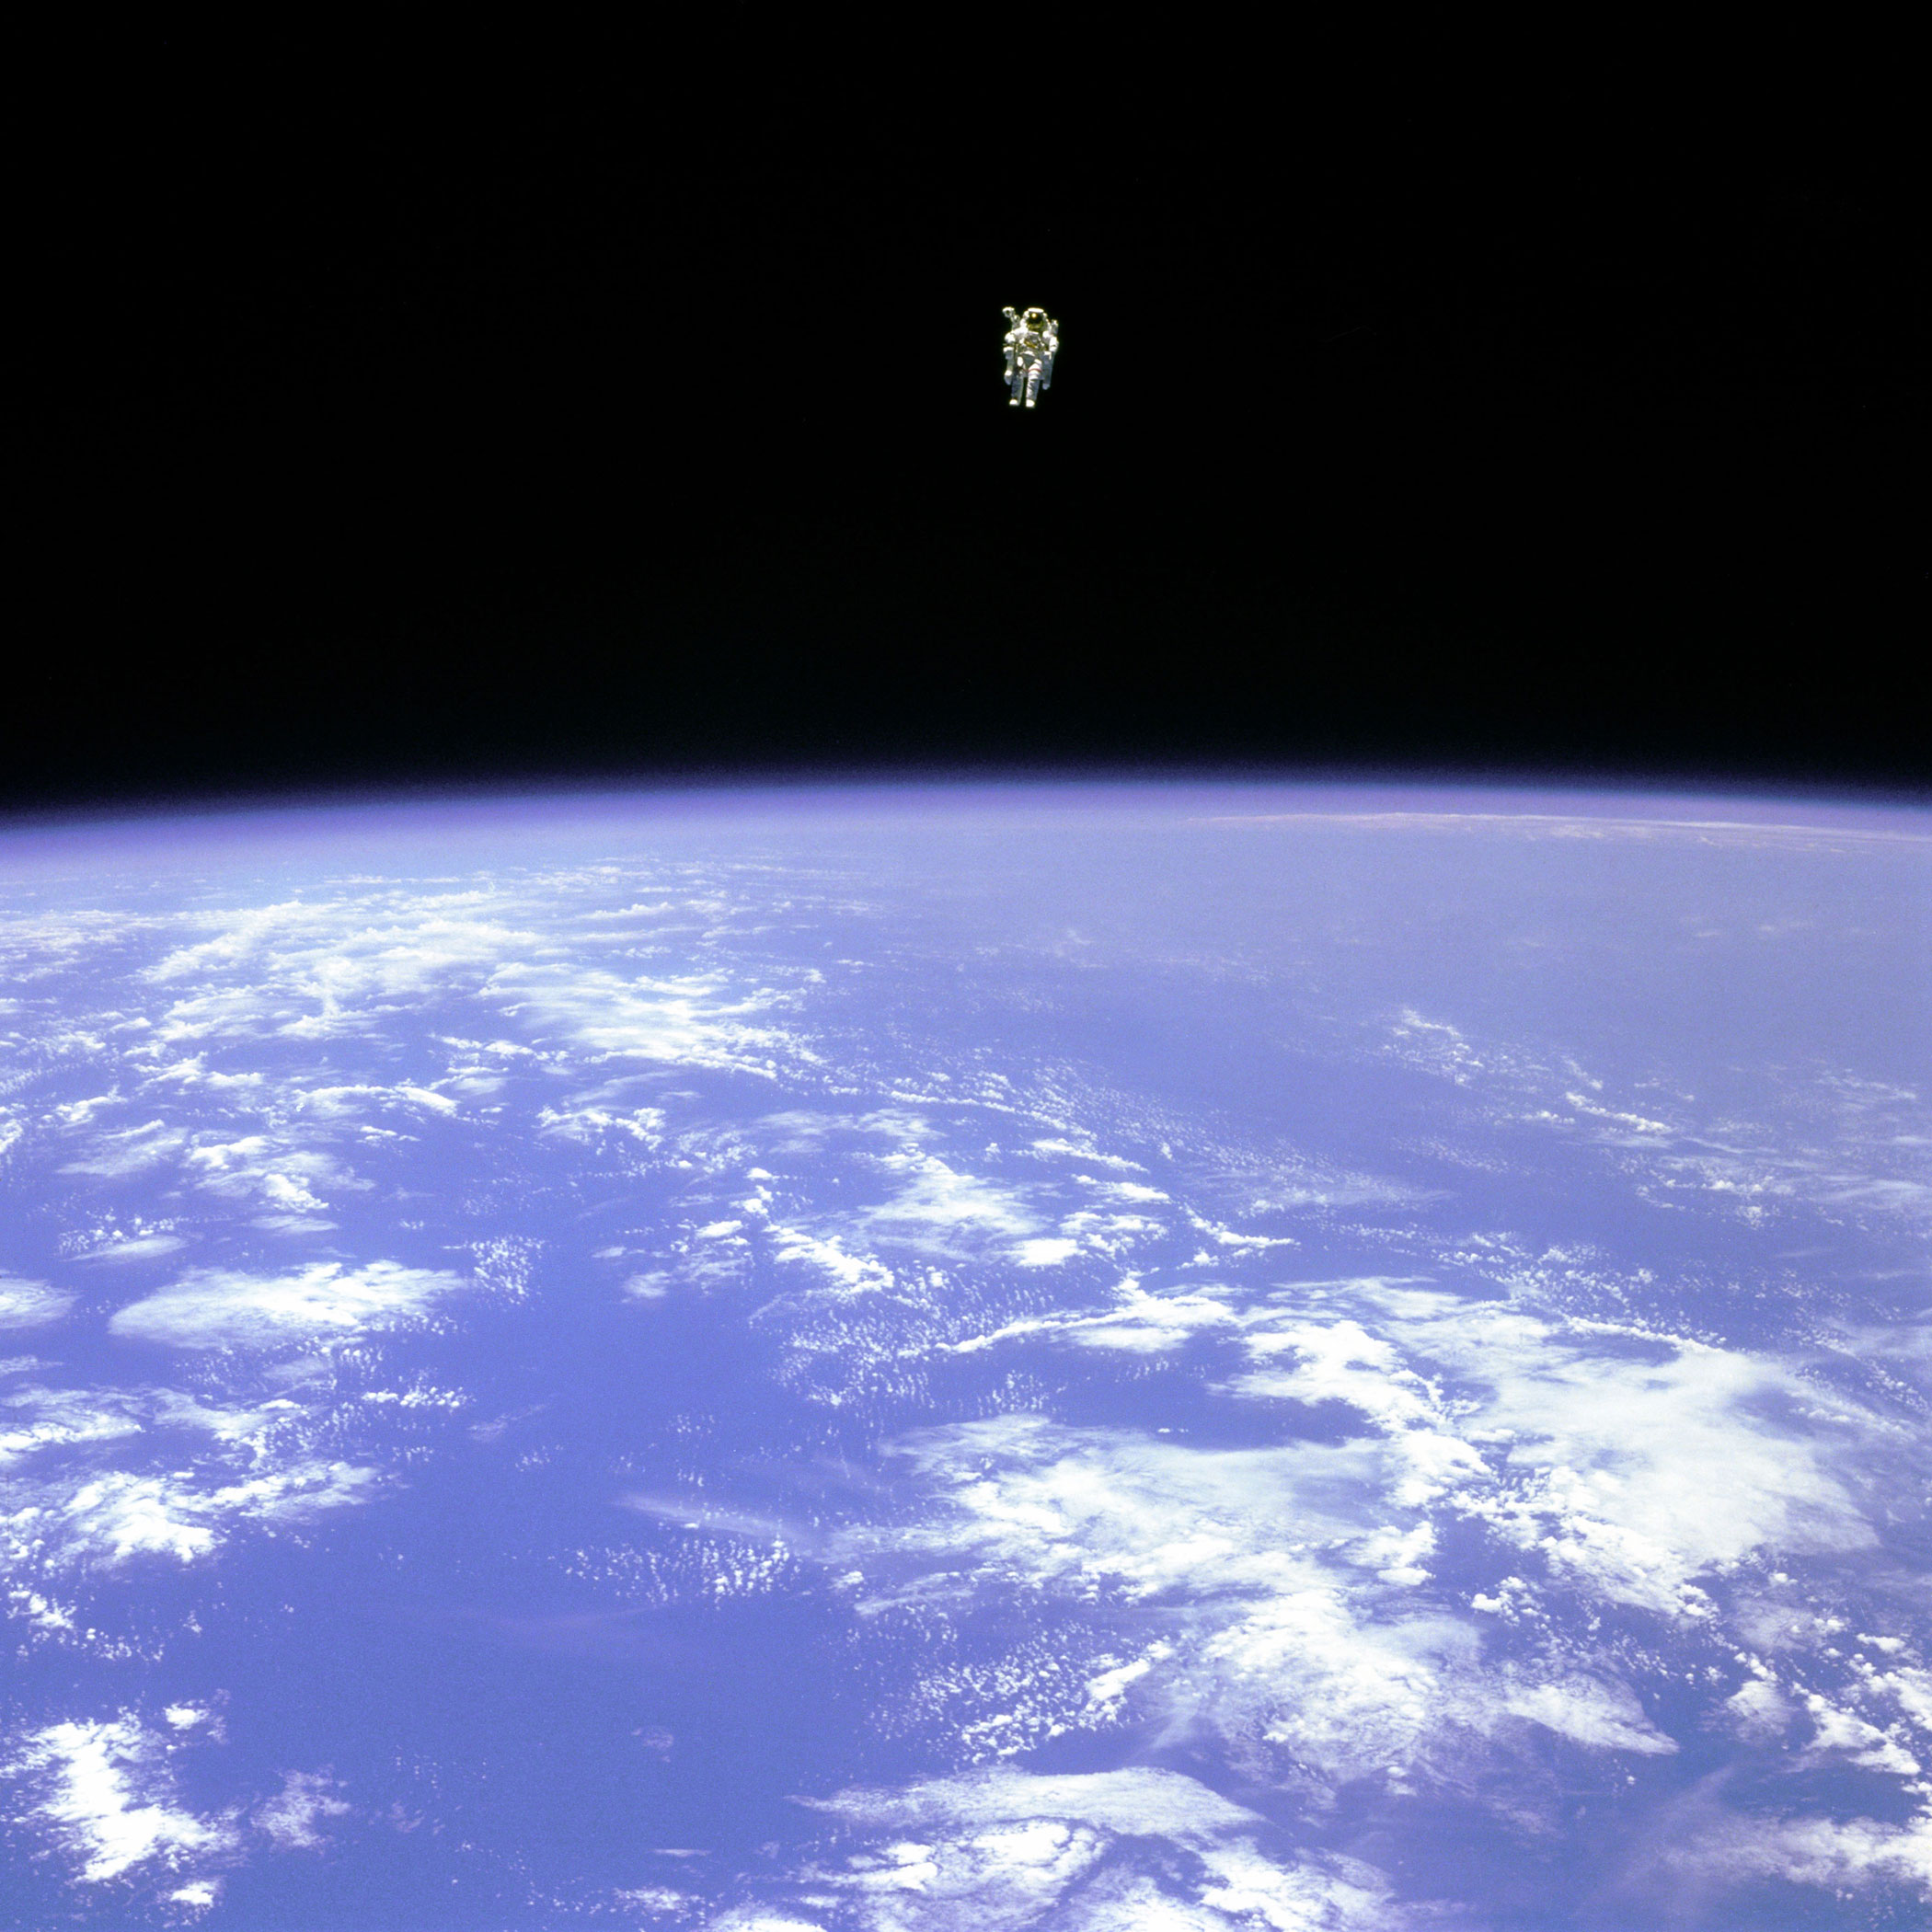 most-iconic-space-photos-bruce-mccandless